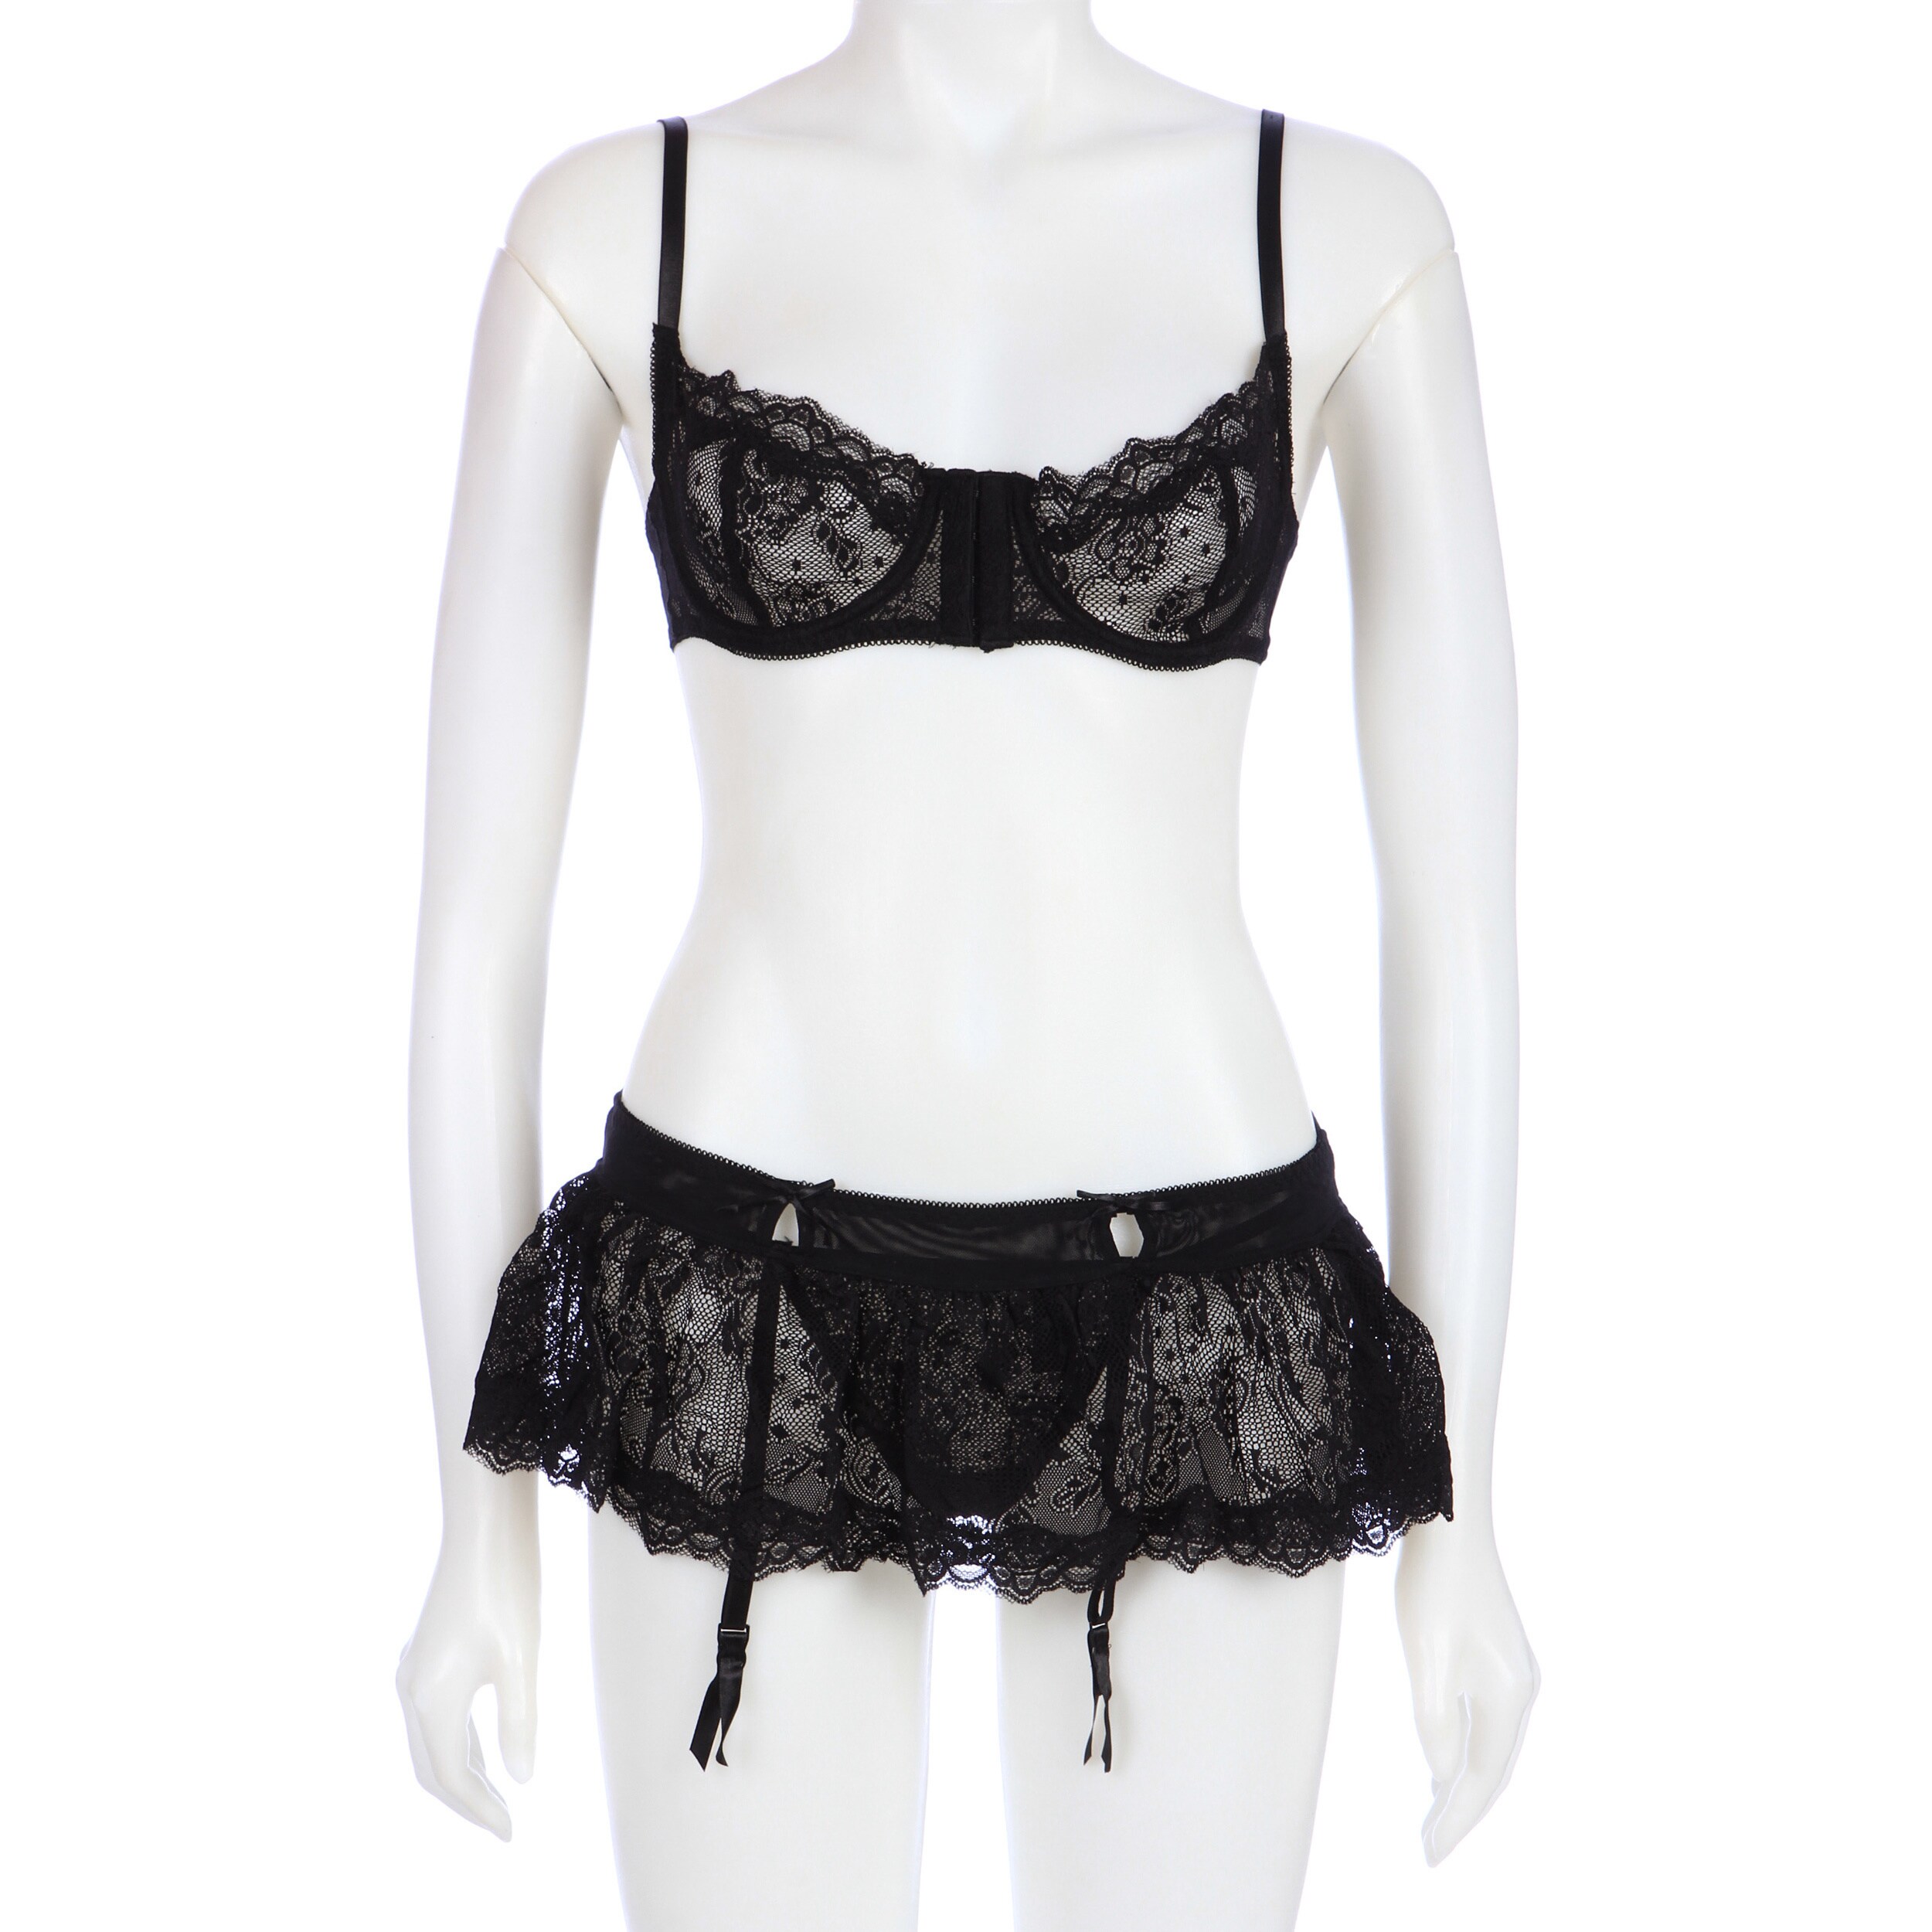 Hookin Up Bra, Skirt and G string 3 Pc Set In Black By Rene Rofe (BlackSize options S/M 2 8, M/L 8 14Care Instruction Hand wash cold water recommendedDue to the personal nature of this product we do not accept returns.  )